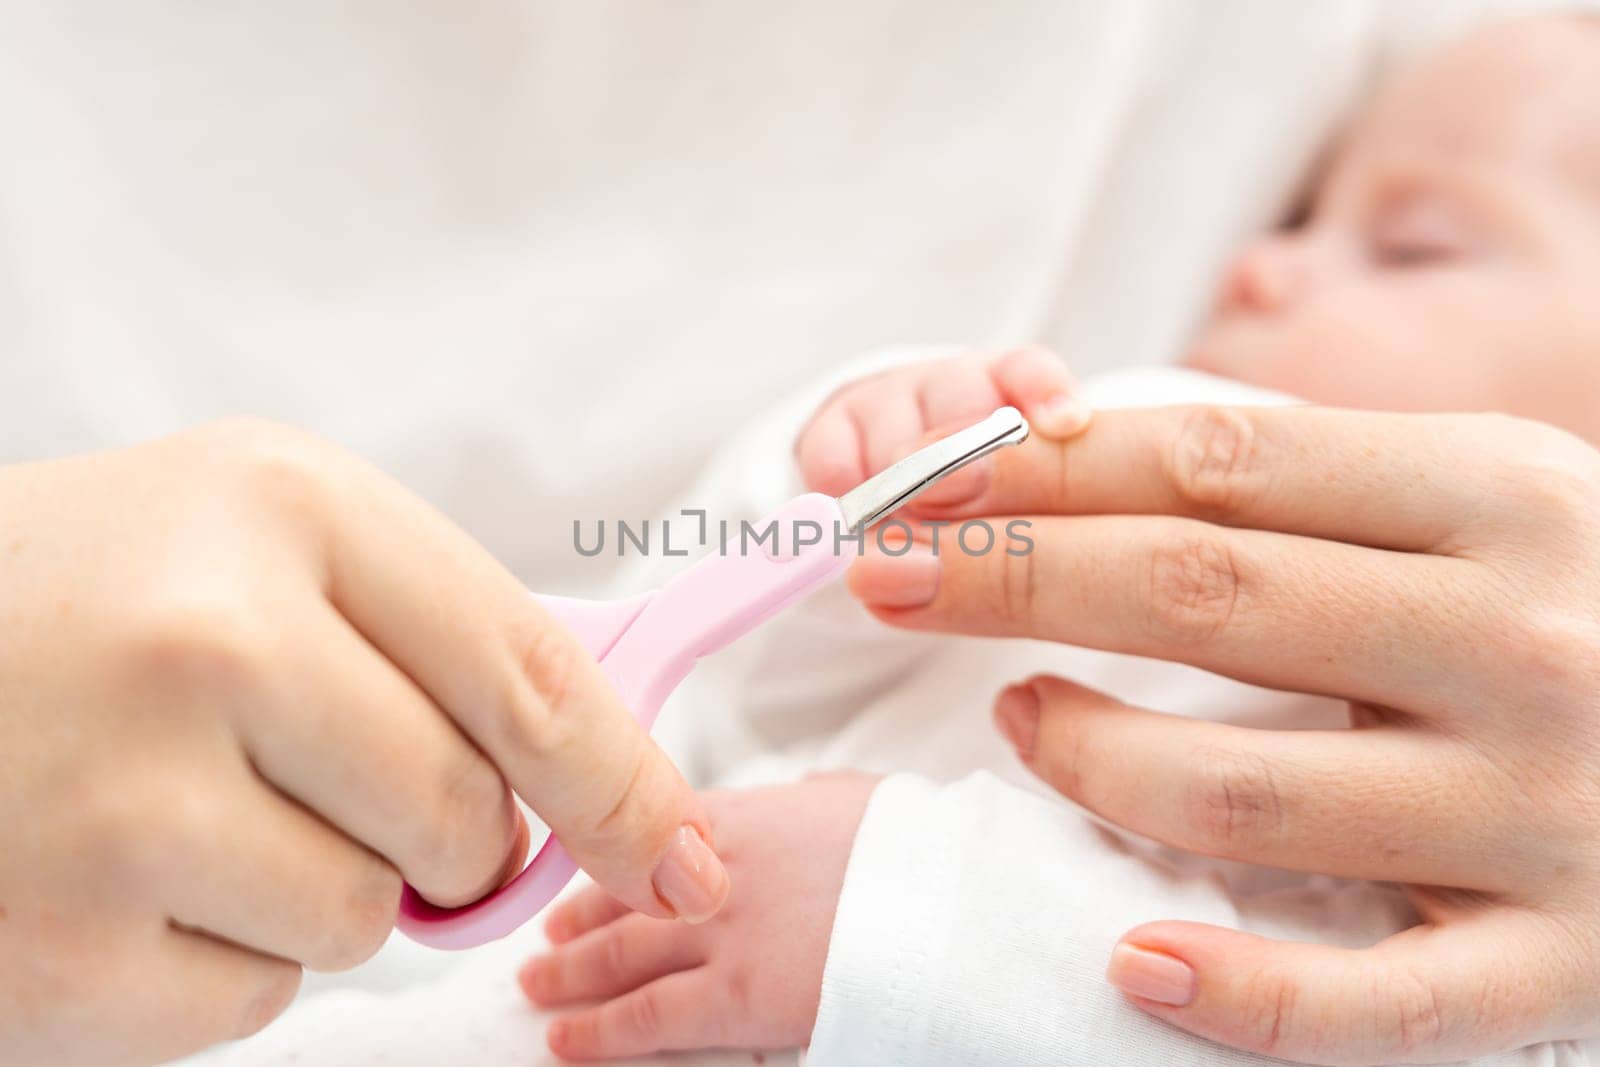 With close-up precision, a mother ensures every nail of her newborn is cut safely and meticulously